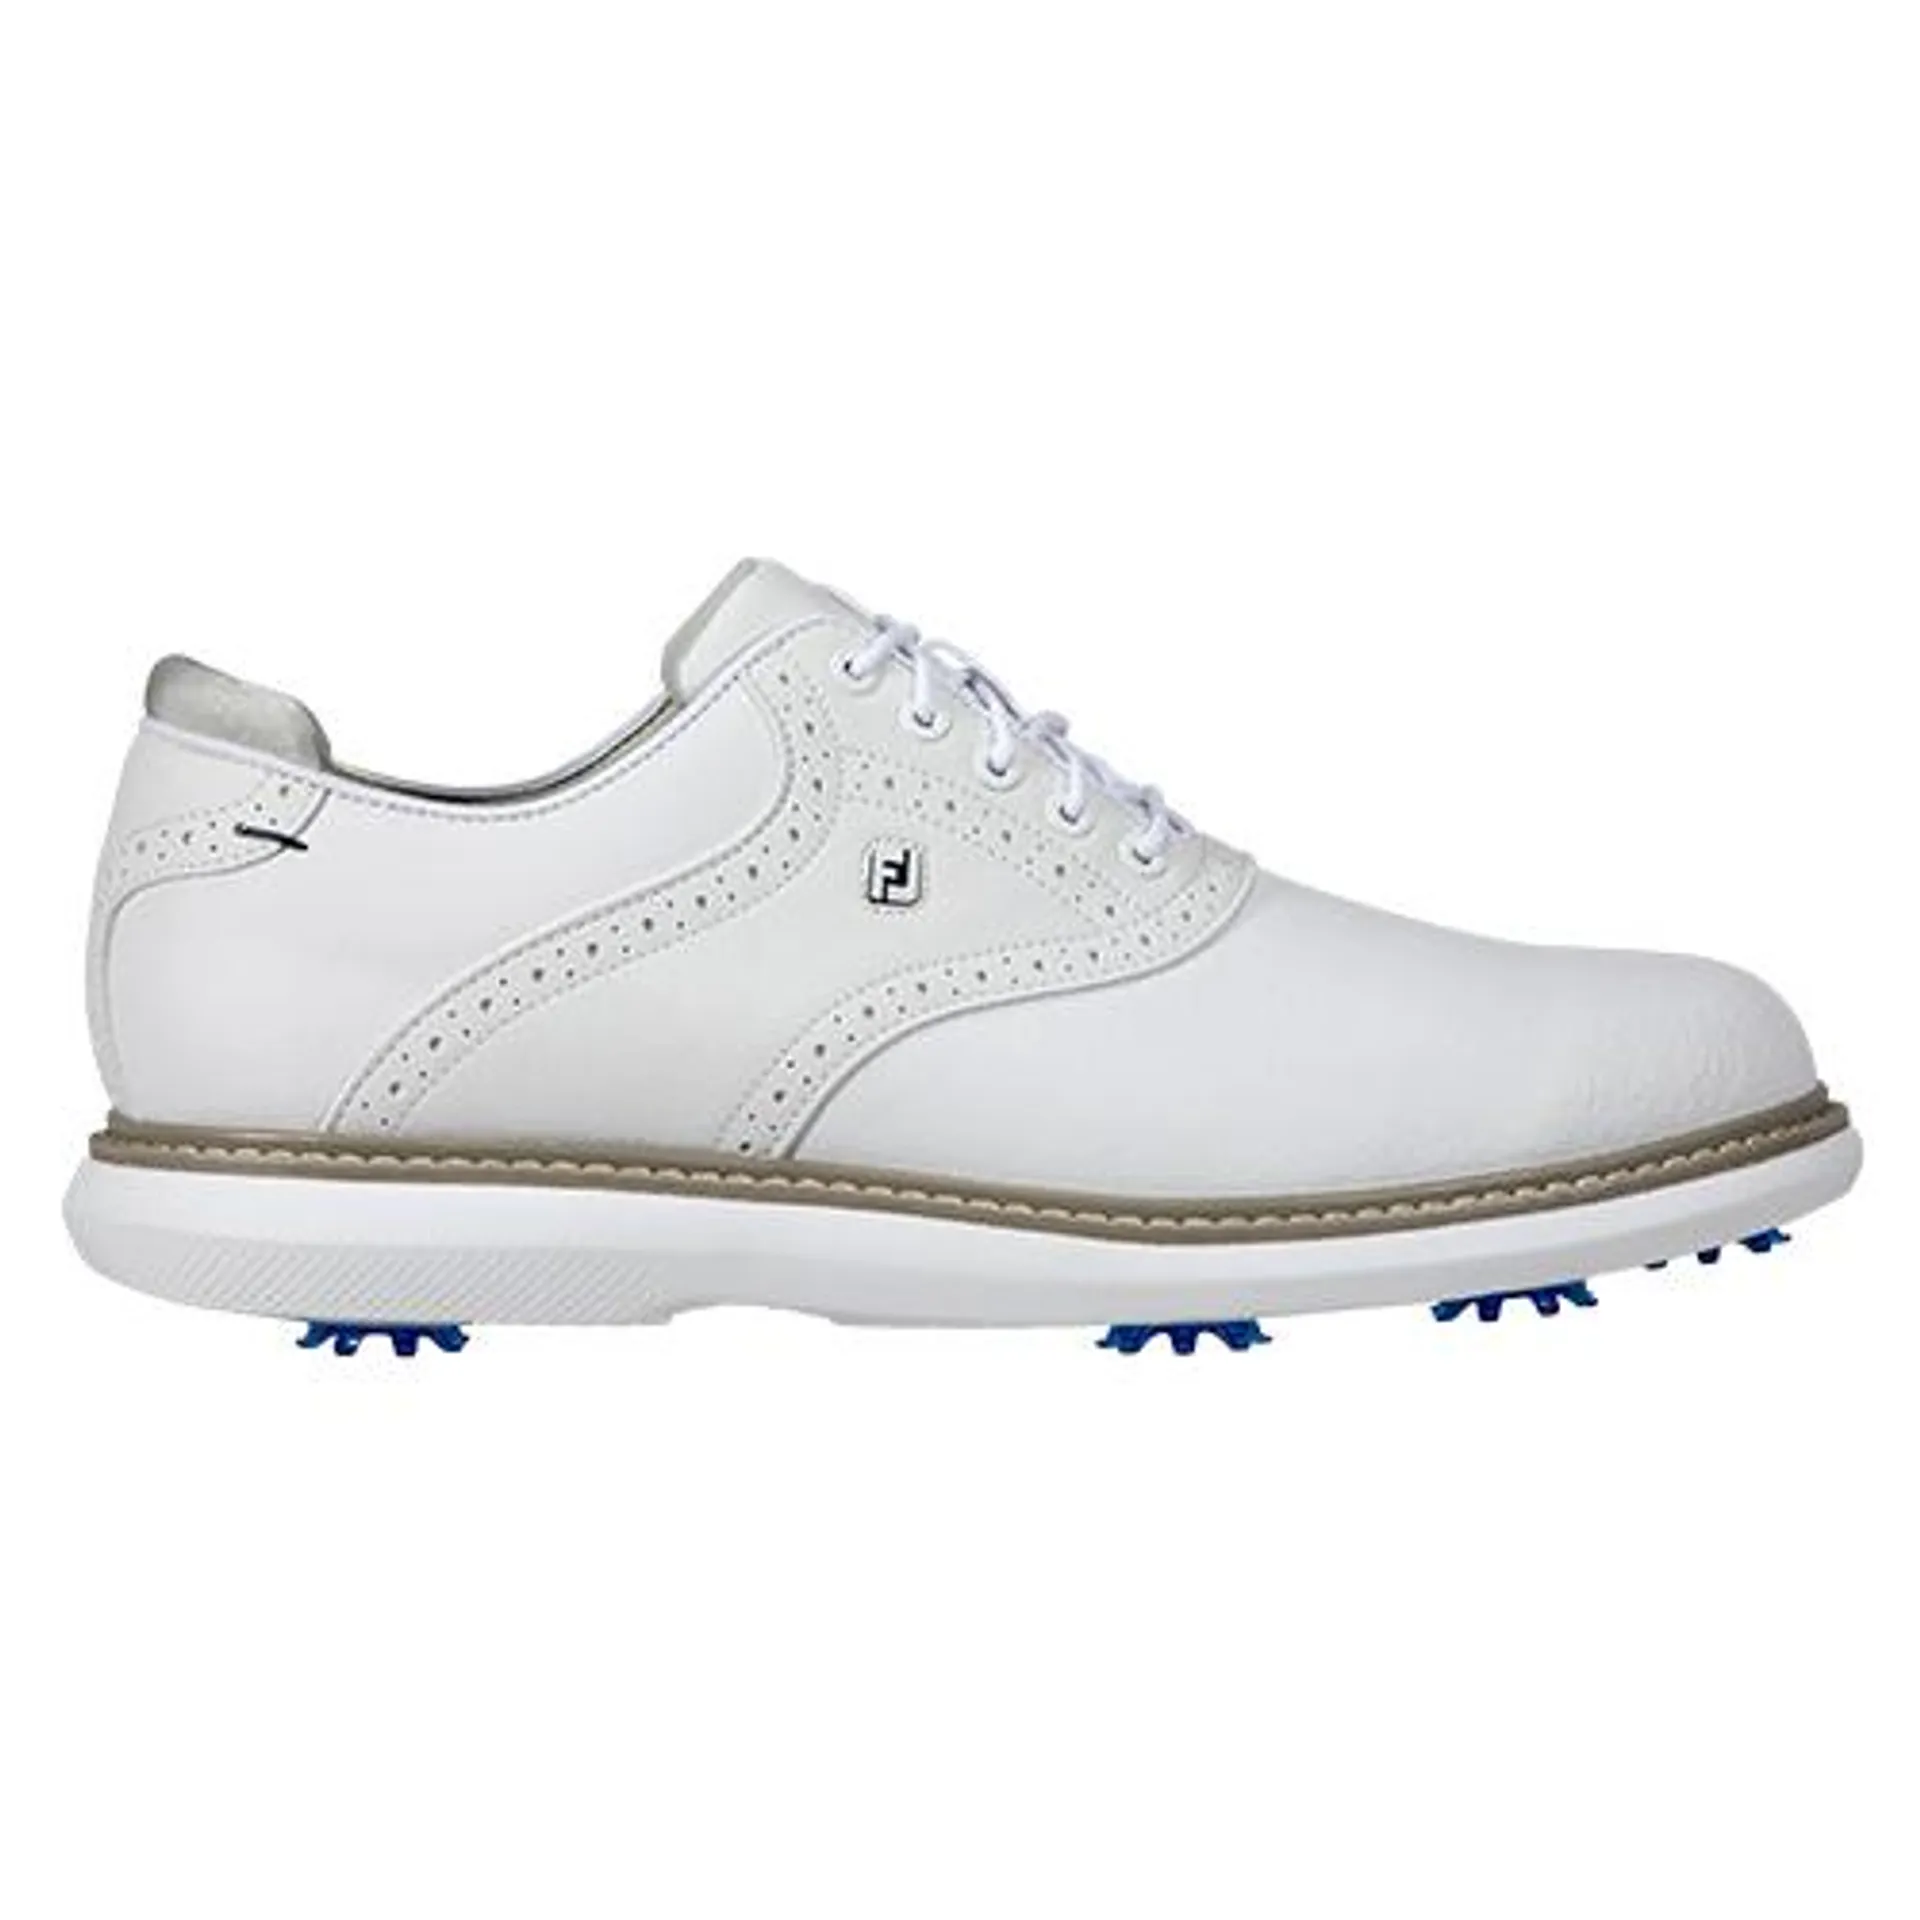 FootJoy Traditions Golf Shoes – White 57903